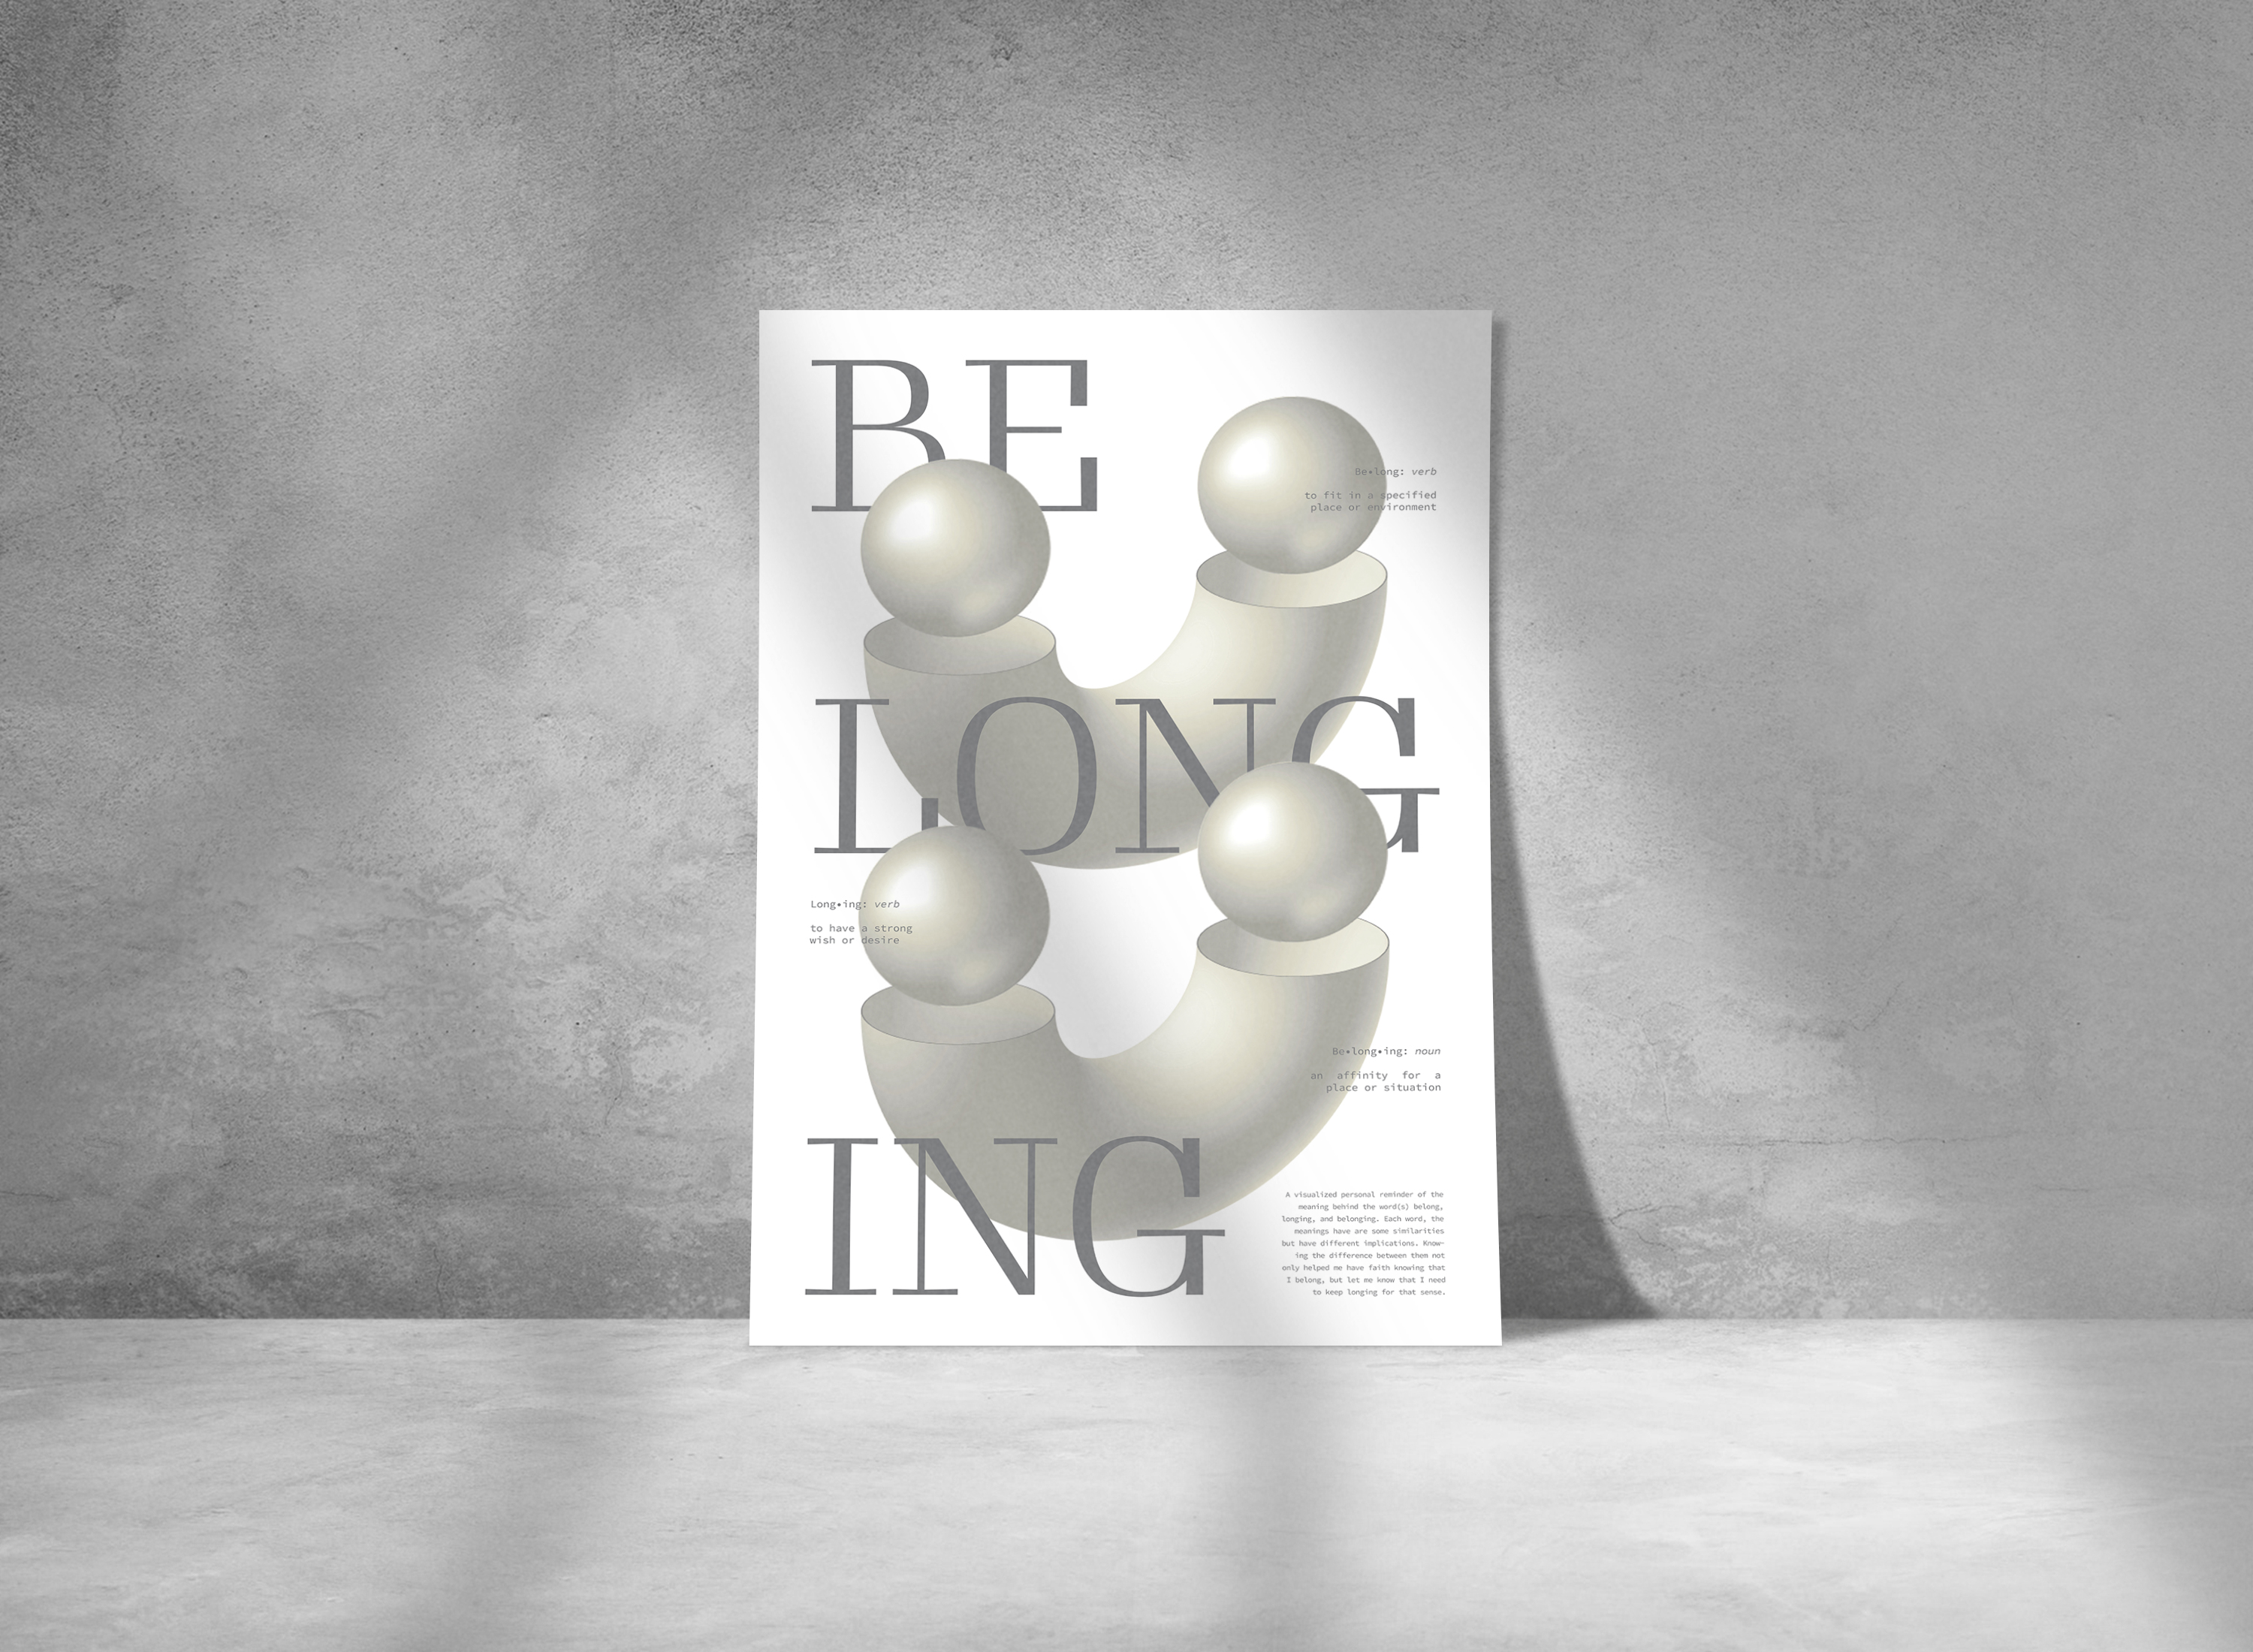 "Belonging" poster by Nathan Riebel.